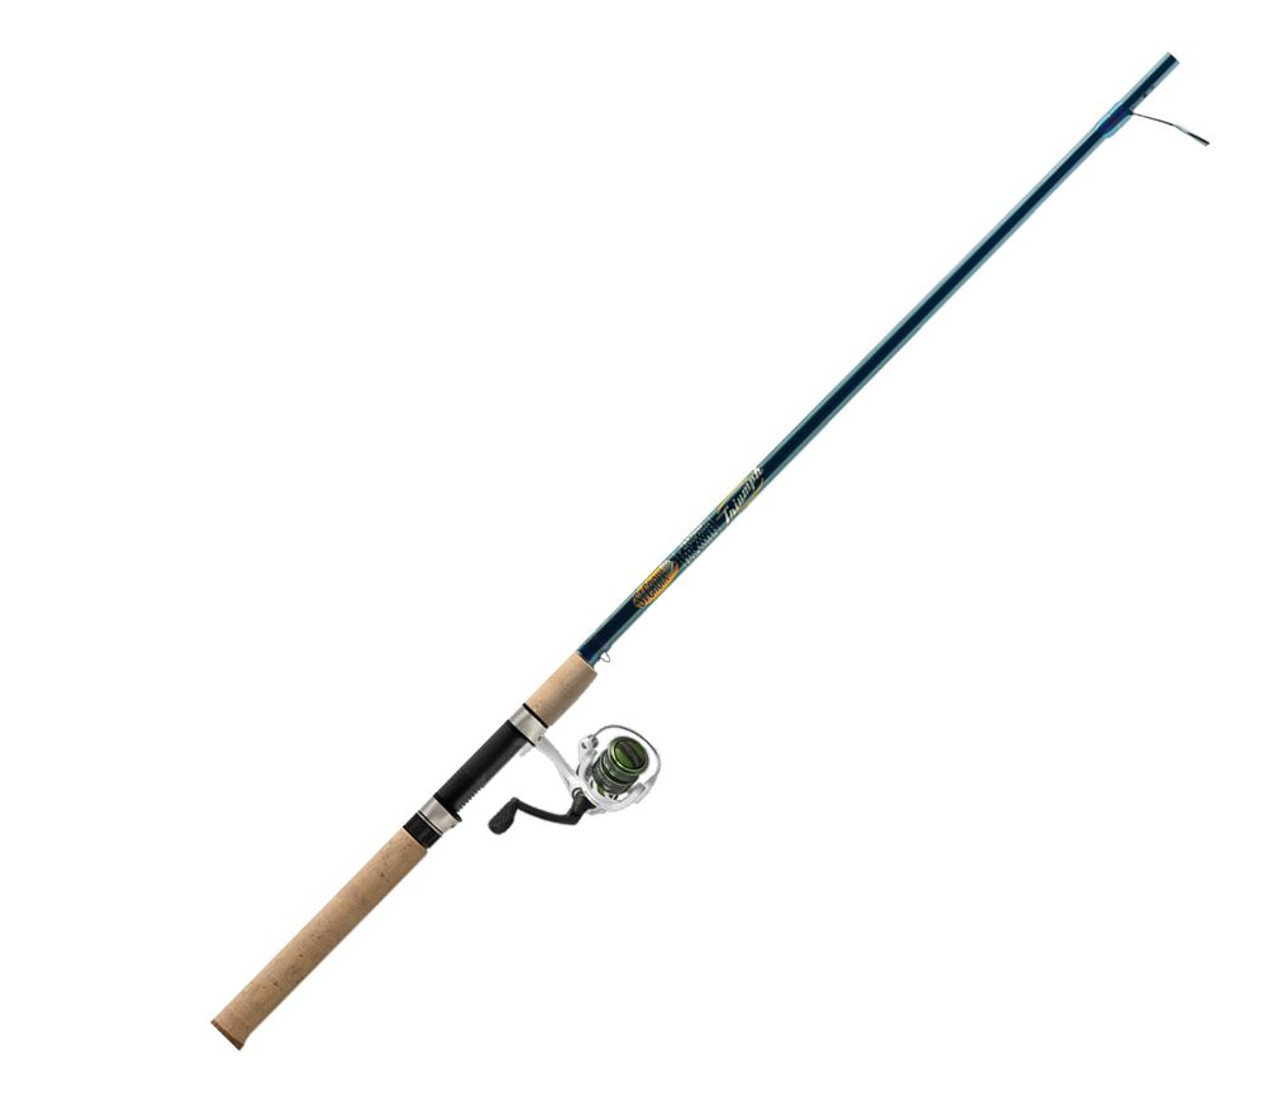 St Croix Triumph Combo w/ Lews Mach I Speed Spin Reel - Kinsey's Outdoors